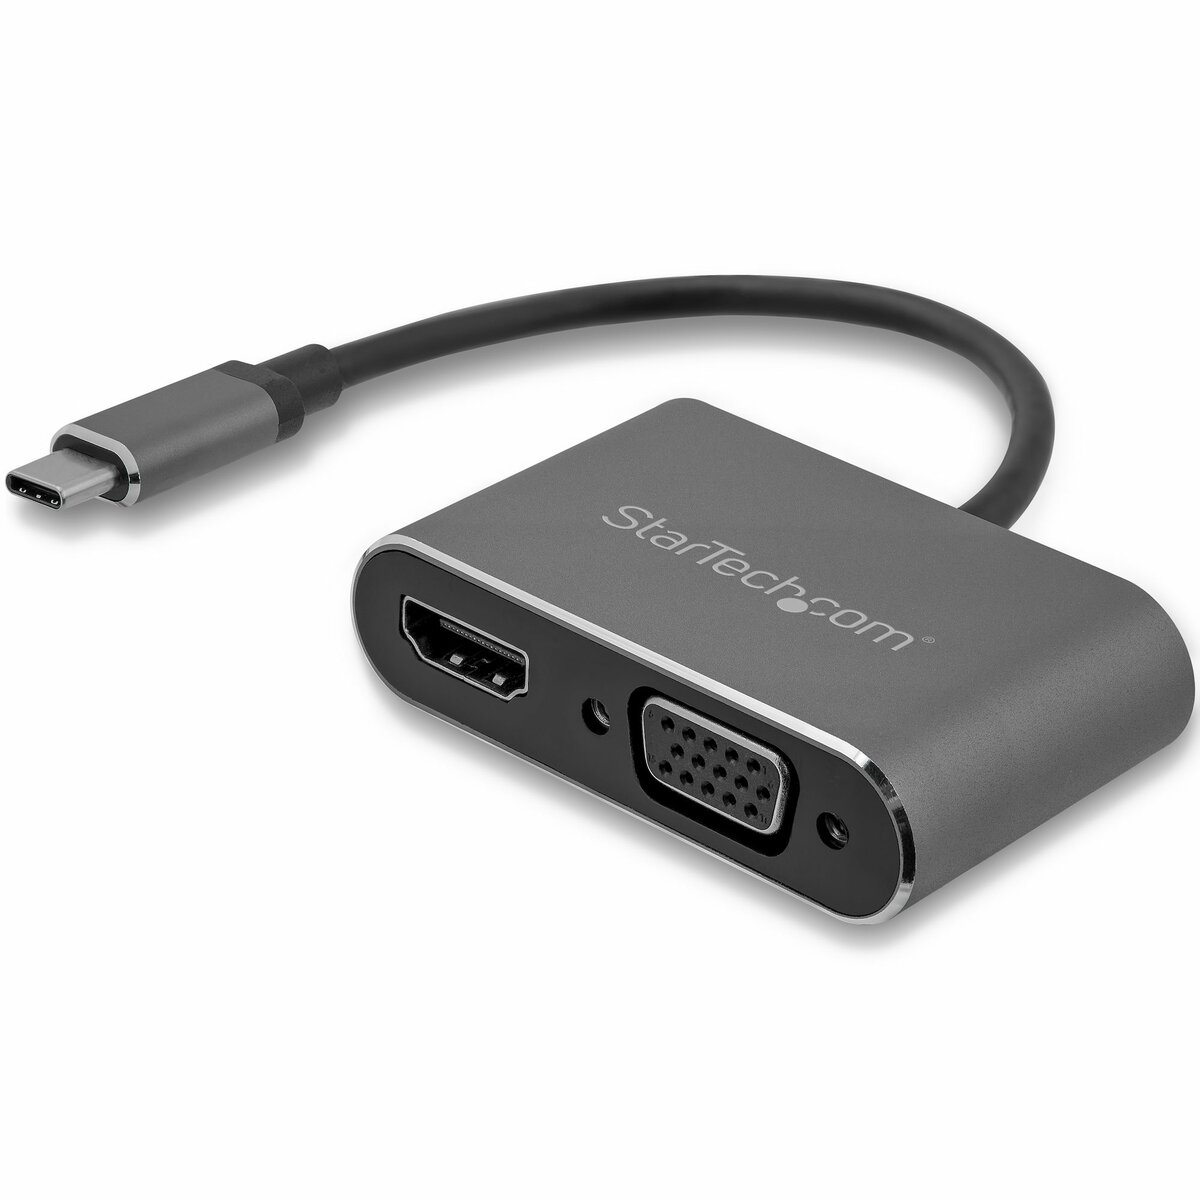 StarTech.com USB-C to VGA HDMI Adapter - 2-in-1 - 4K 30Hz - Space Grey - Windows & Mac Compatible (CDP2HDVGA) - adapter - IT6222 - space gray